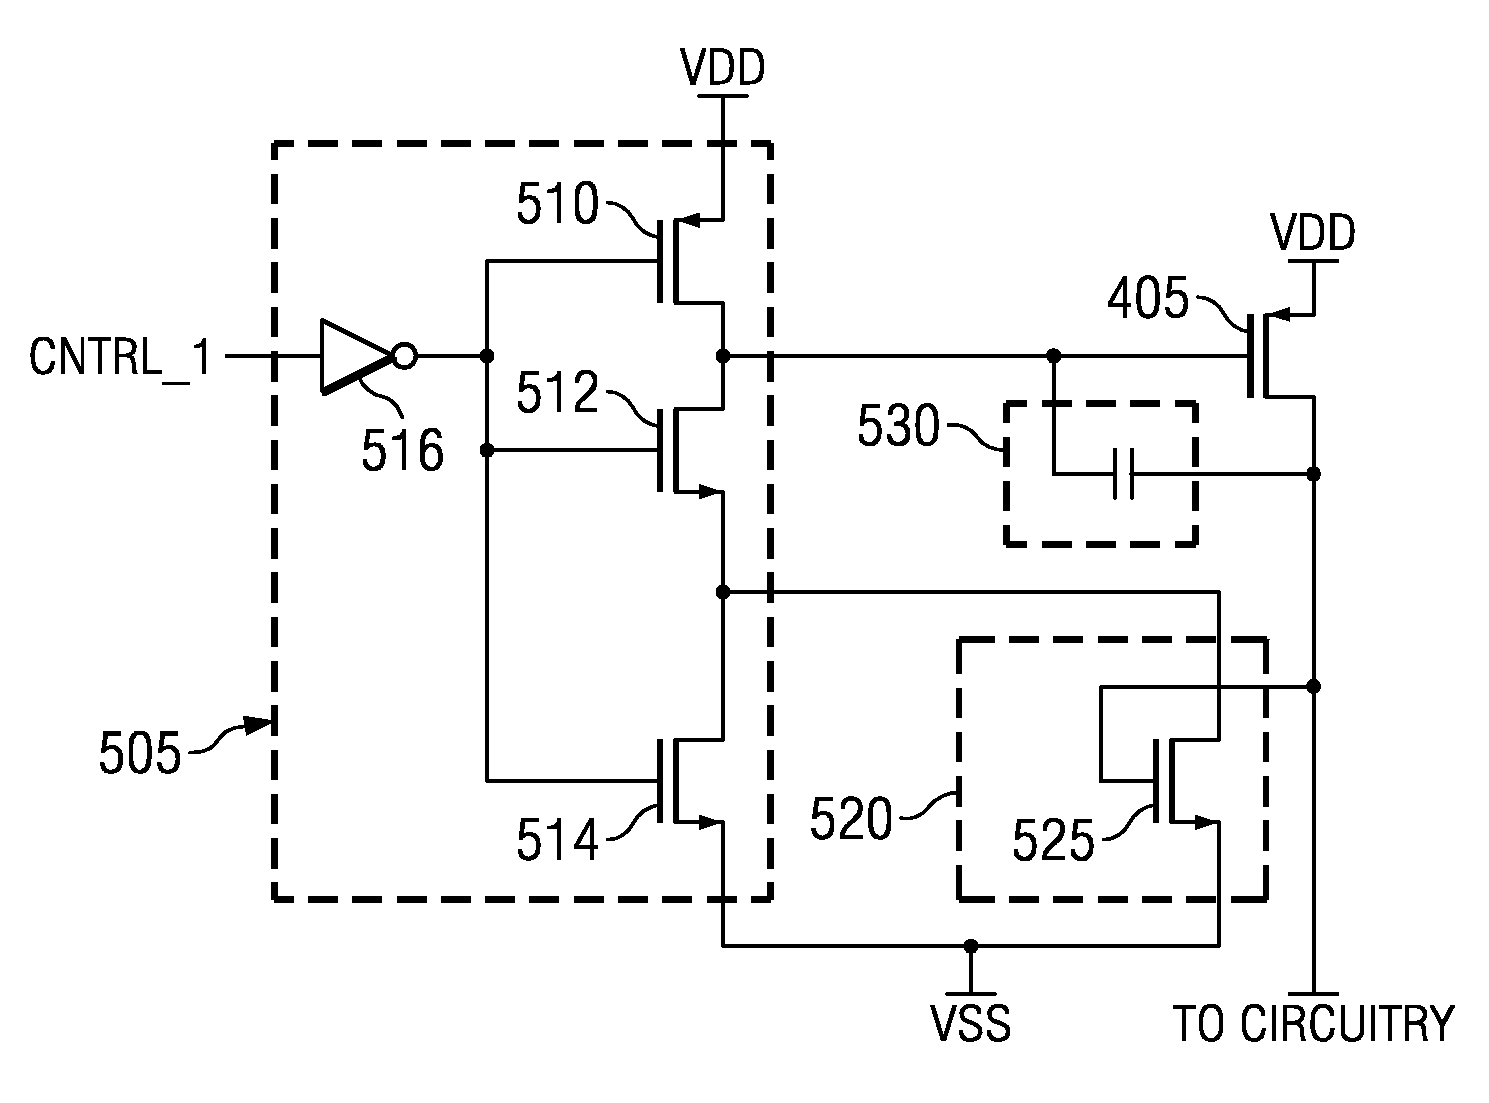 Potential and rate adjust header switch circuitry reducing transient current